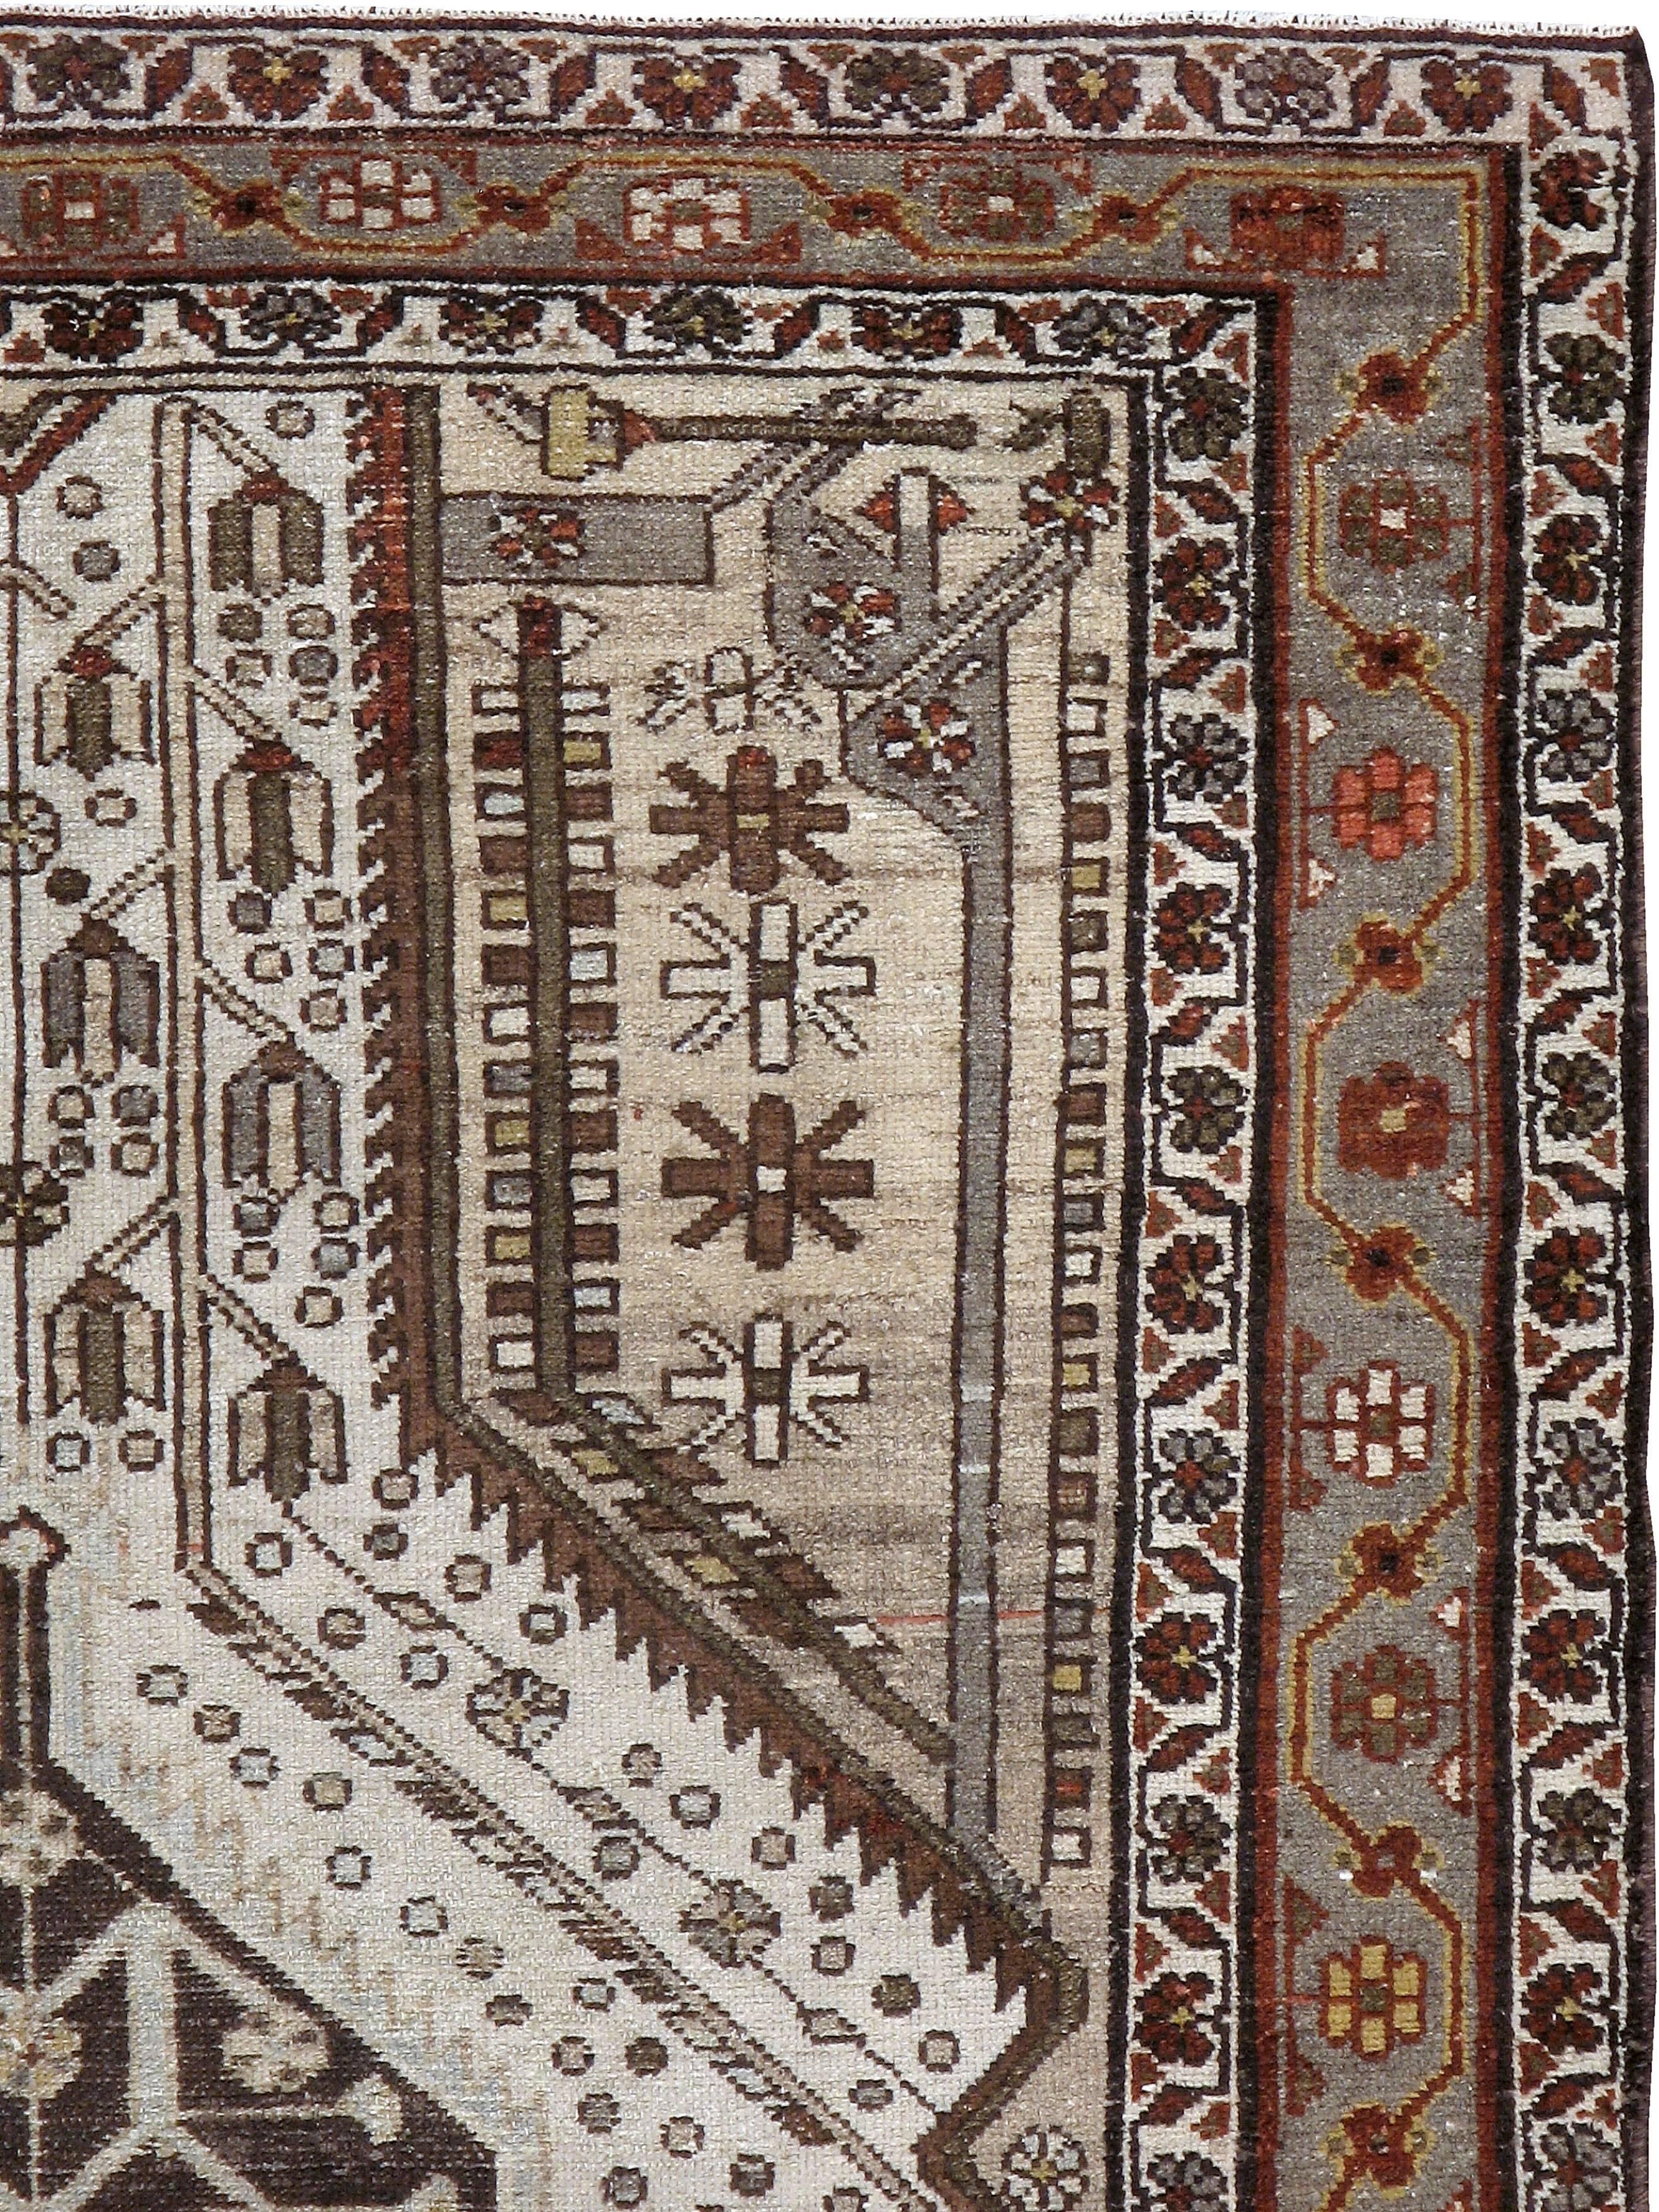 An antique Persian Malayer carpet from the first quarter of the 20th century.